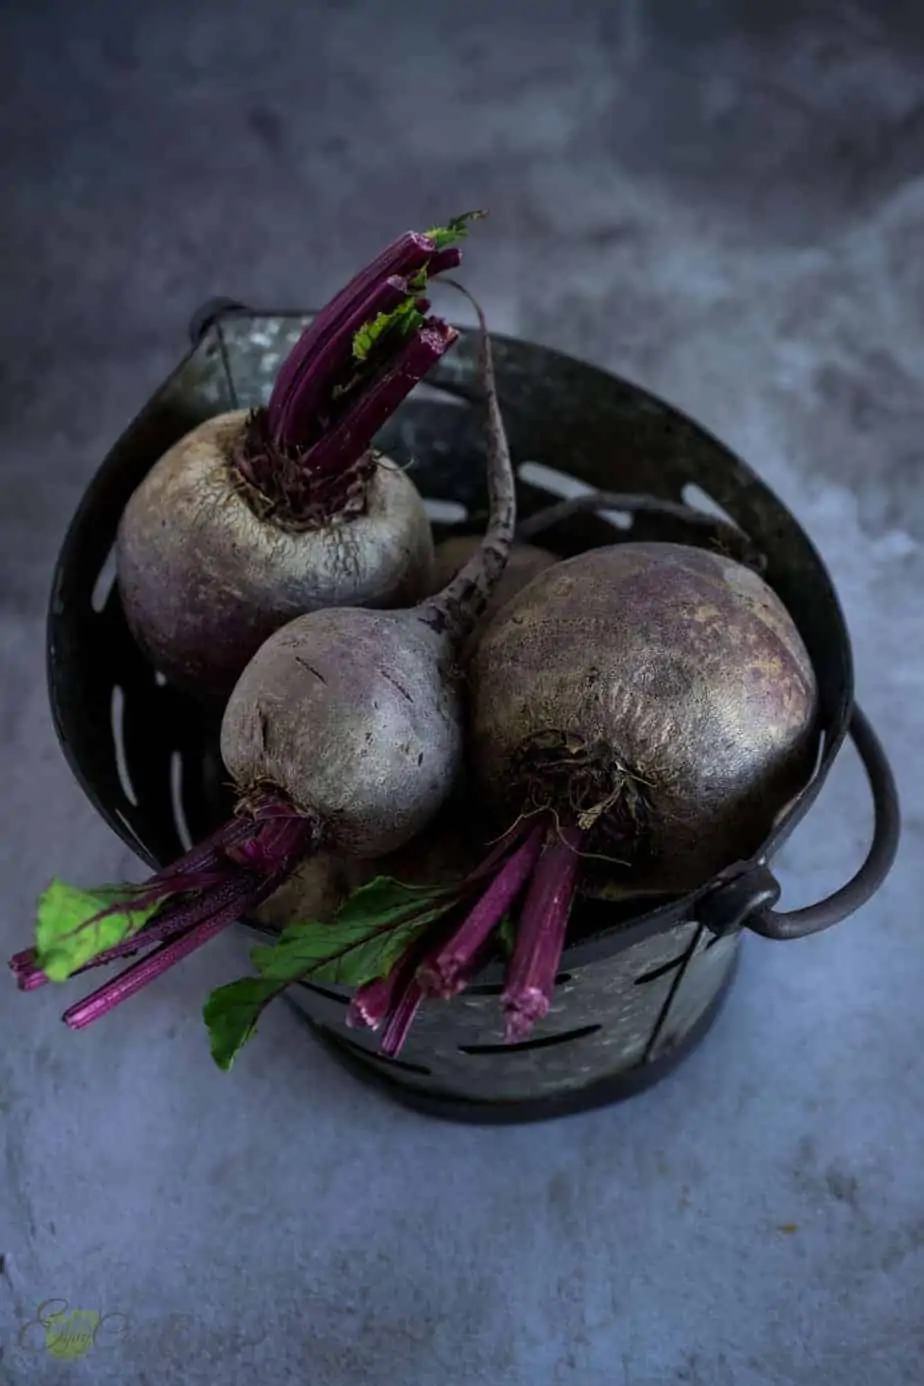 Raw beets in a metal basket